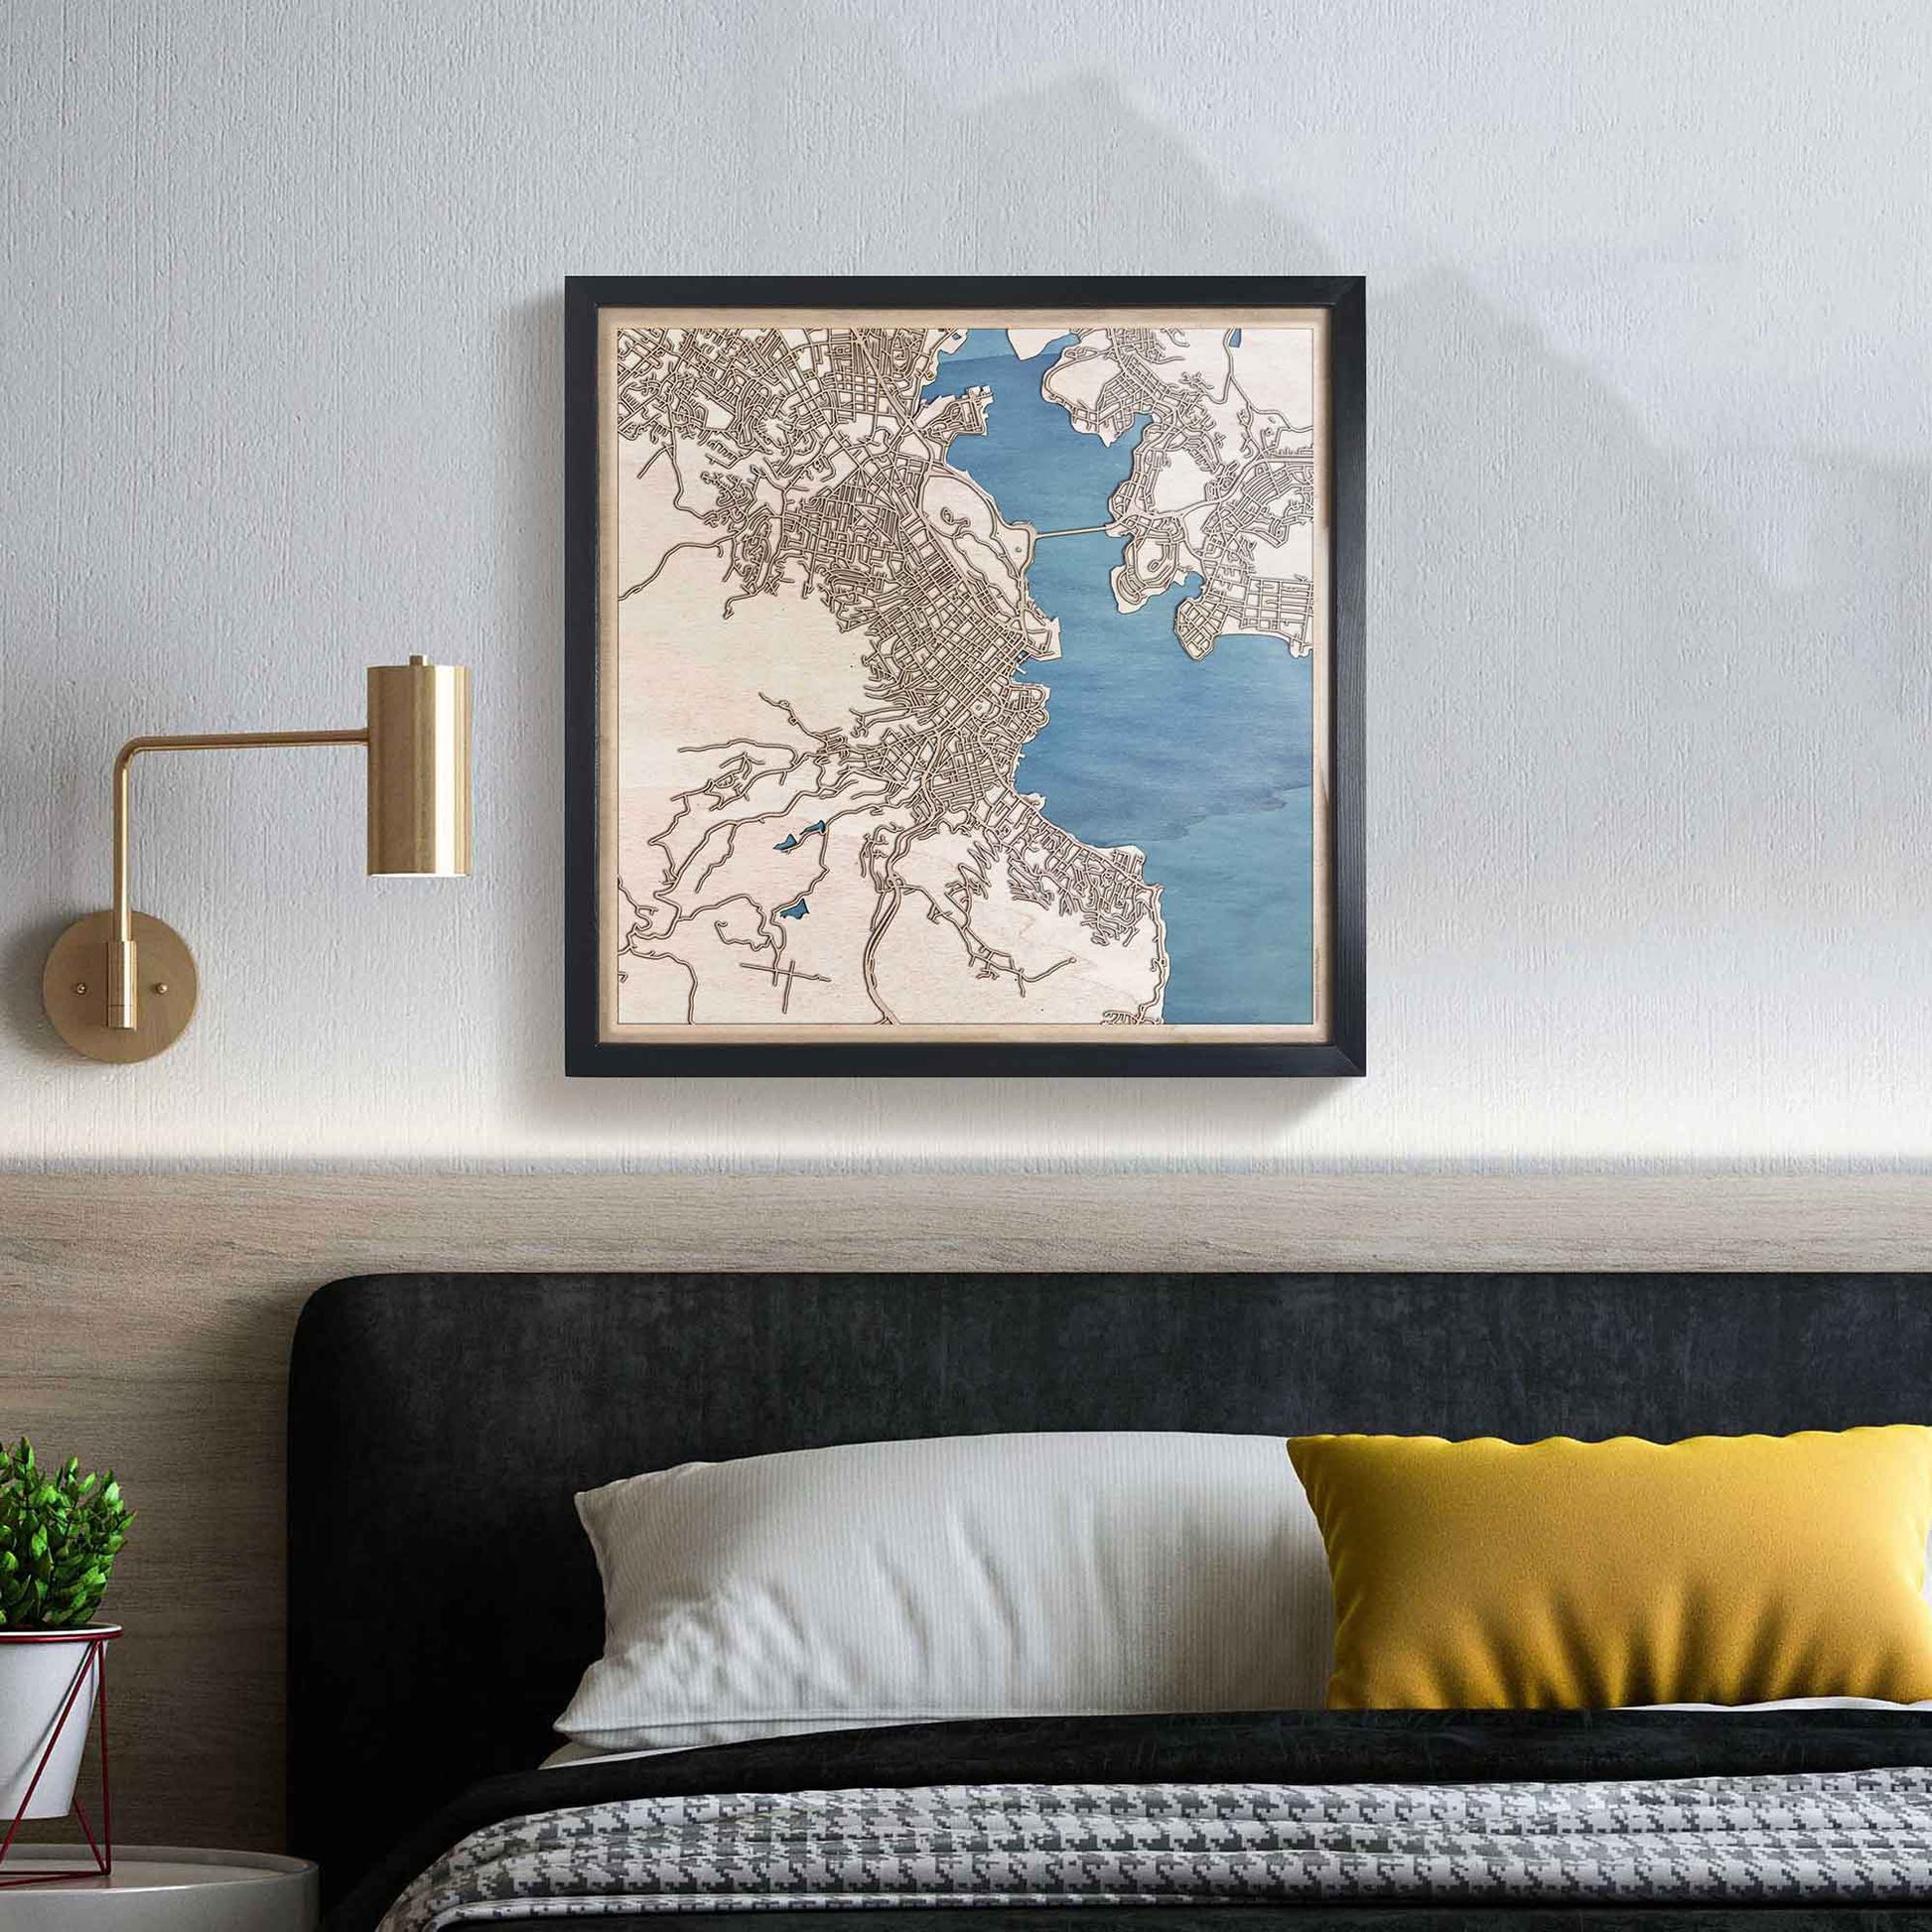 Hobart Wooden Map by CityWood - Custom Wood Map Art - Unique Laser Cut Engraved - Anniversary Gift